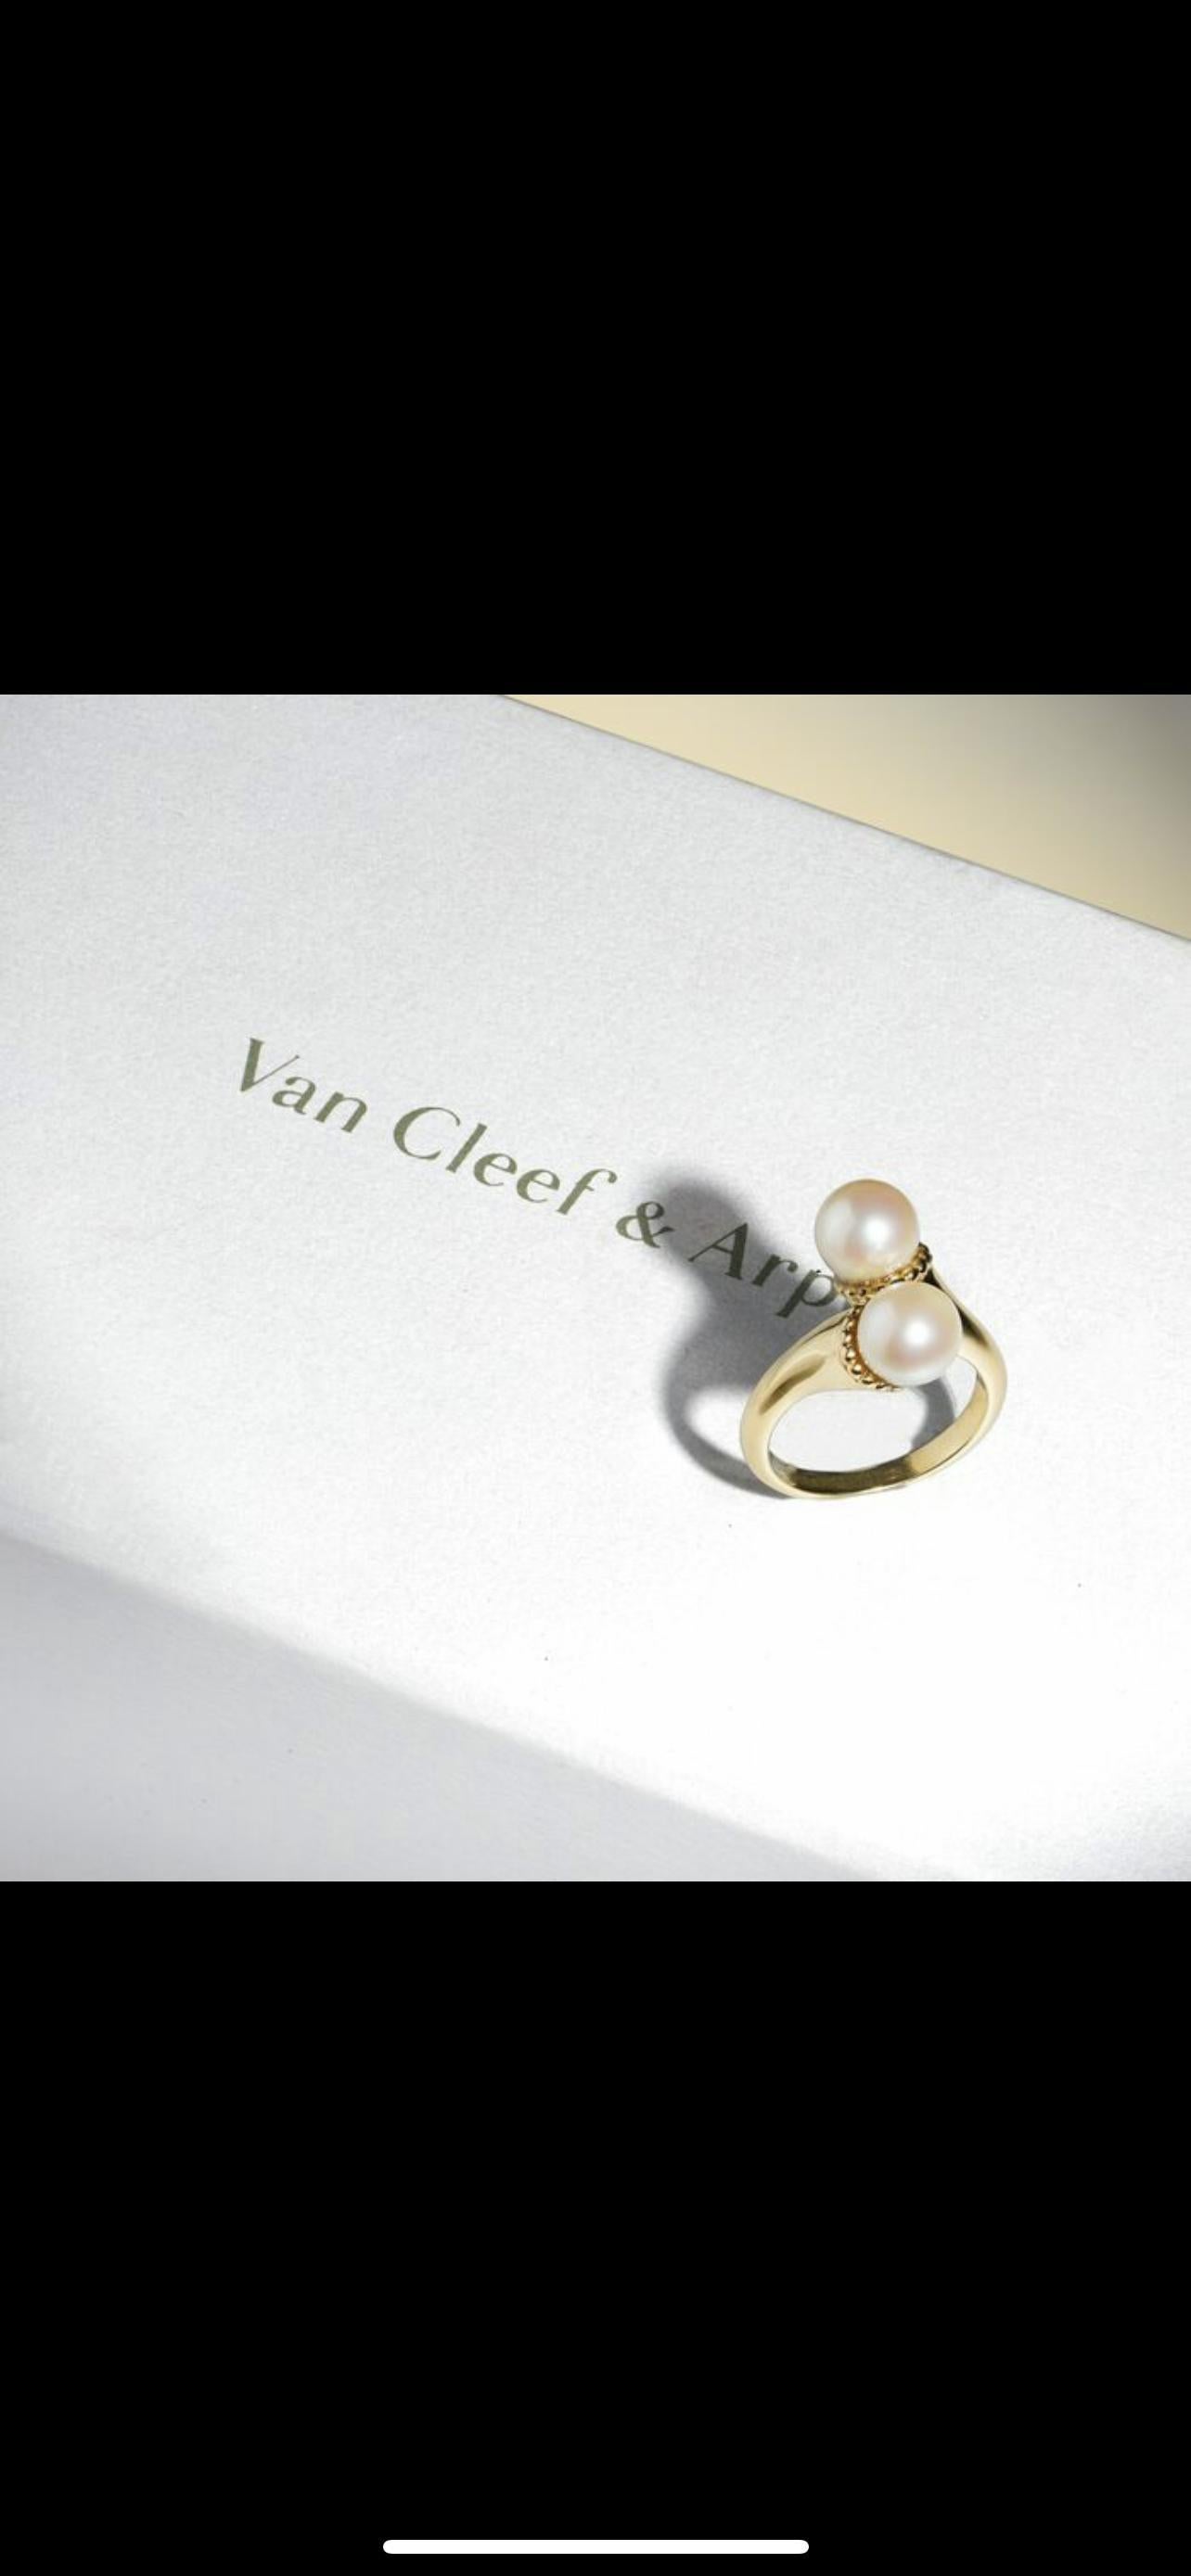 Van Cleef & Arpels You And Me Freshwater Pearl Ring

Experience beauty and elegance with the exquisite Toi Et Moi freshwater pearl ring by Van Cleef & Arpels. Make a statement with this timeless classic that captures the spirit of love in its unique